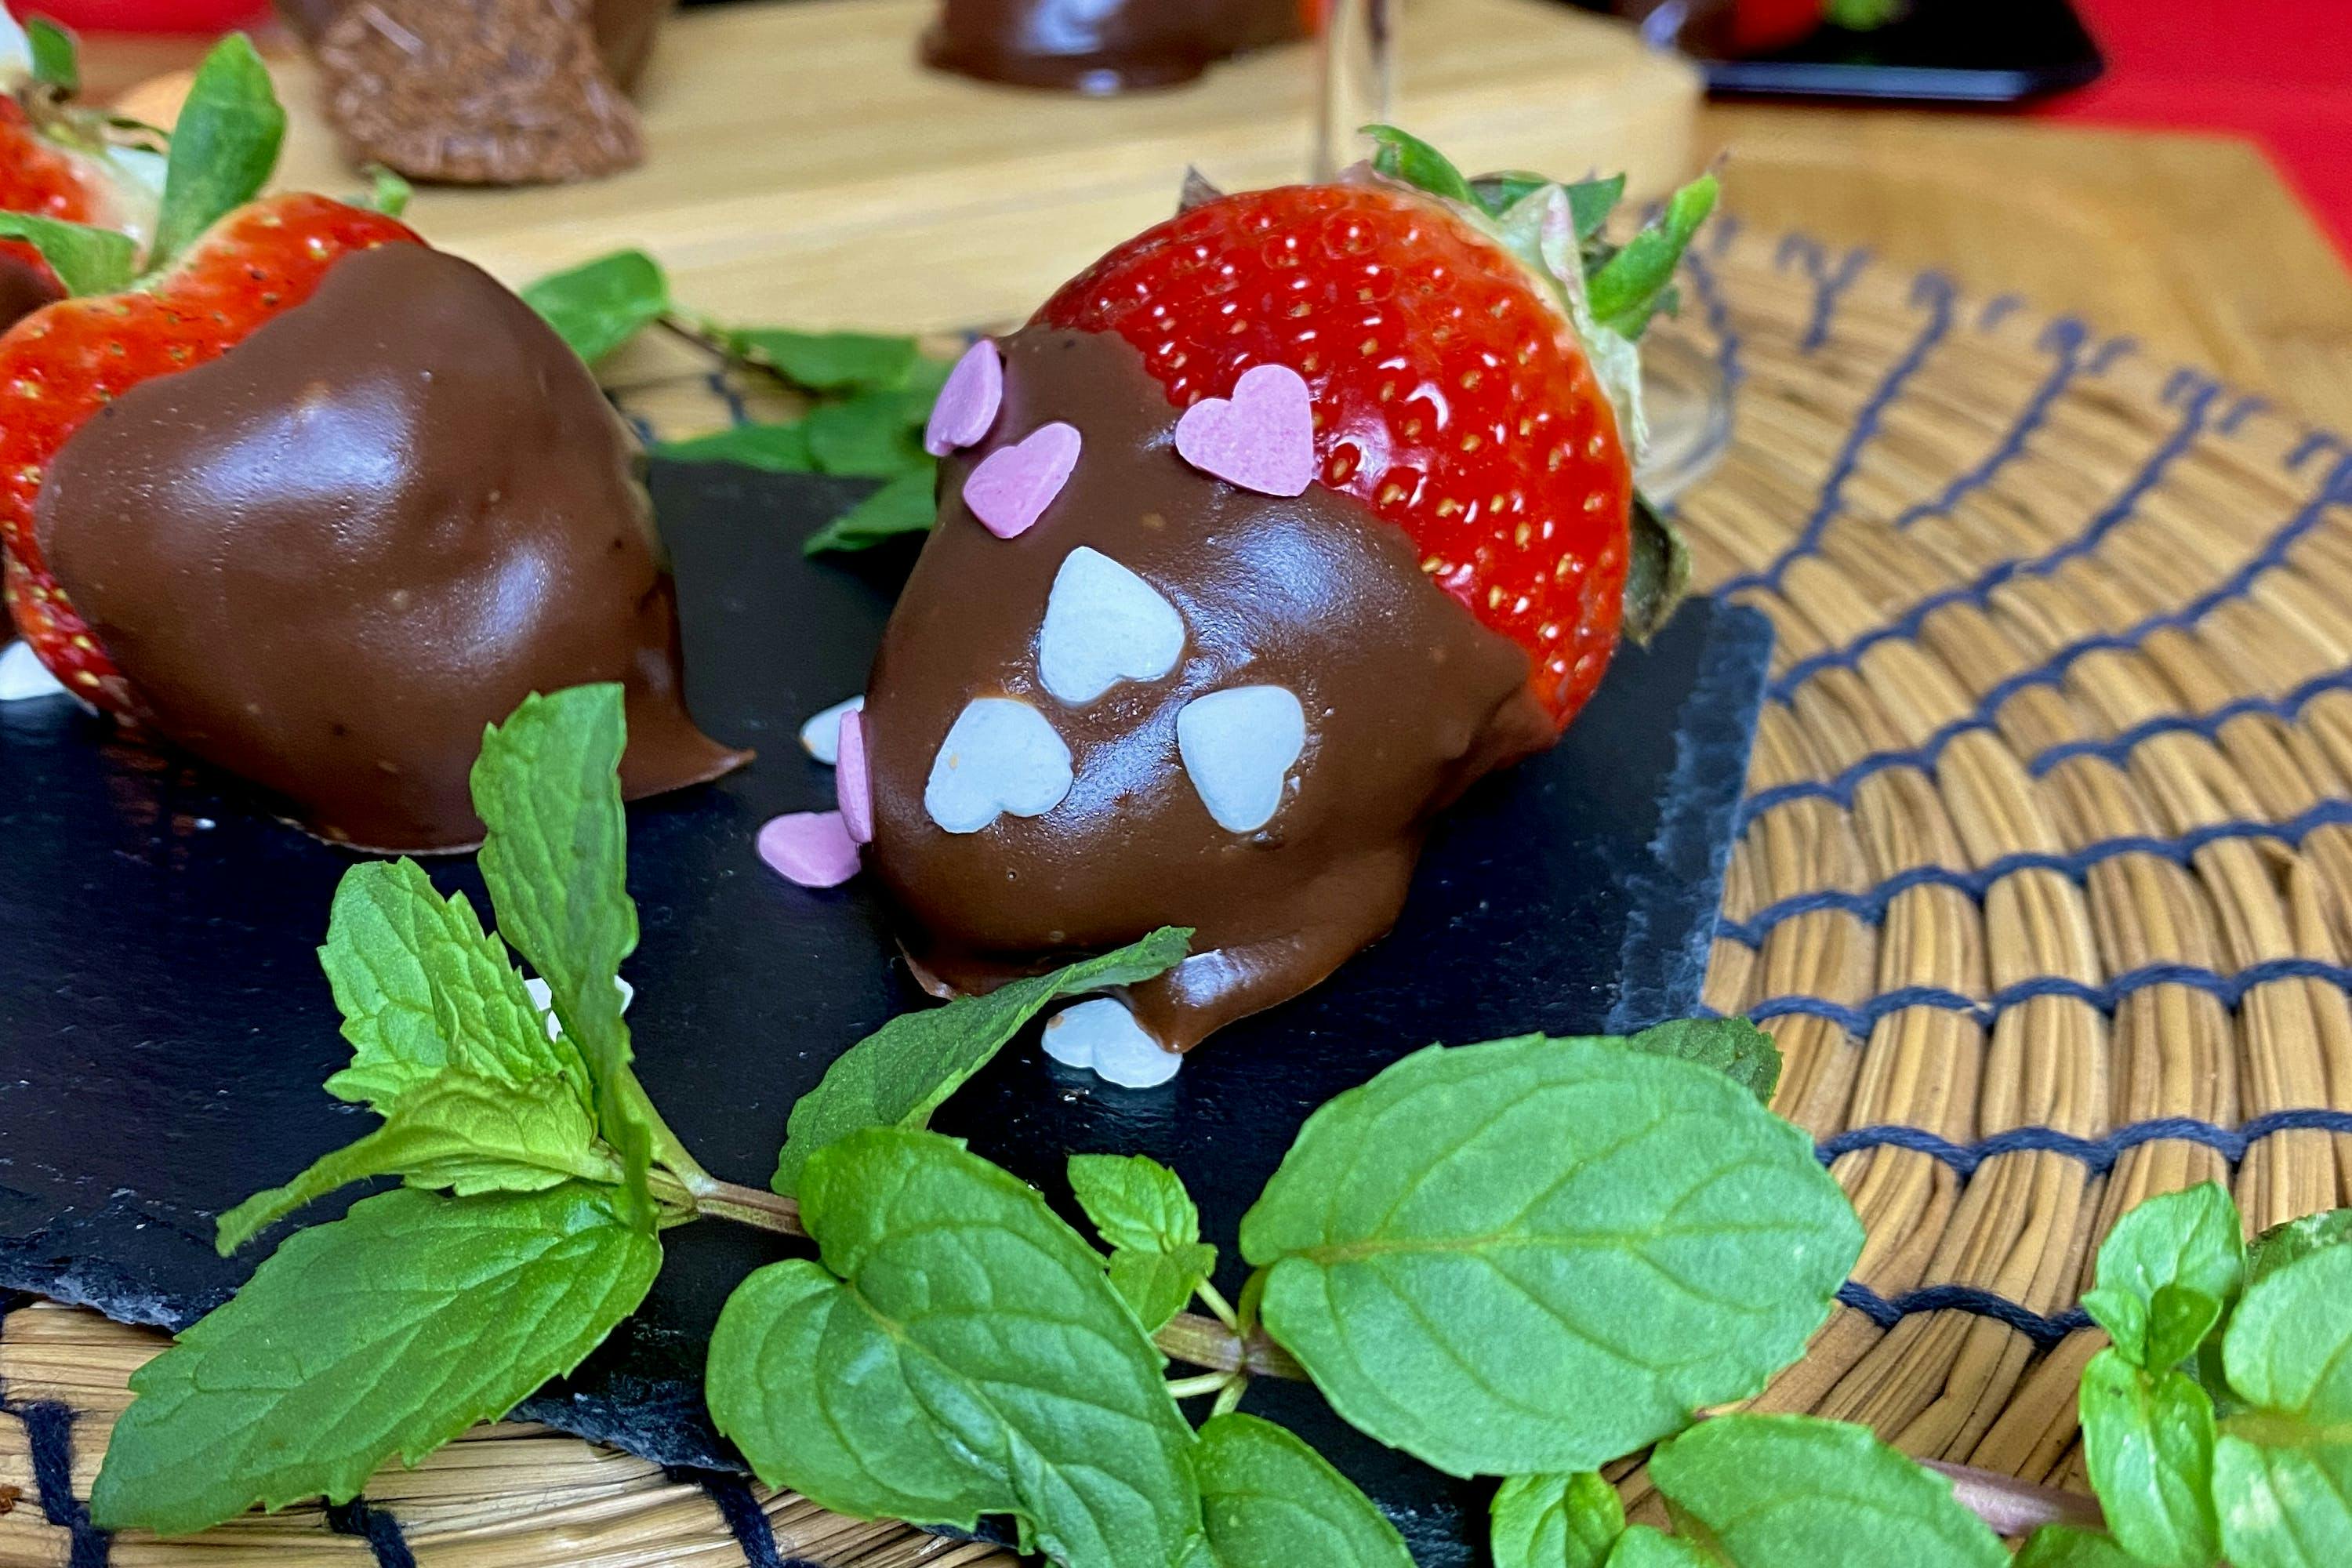 Strawberries with chocolate